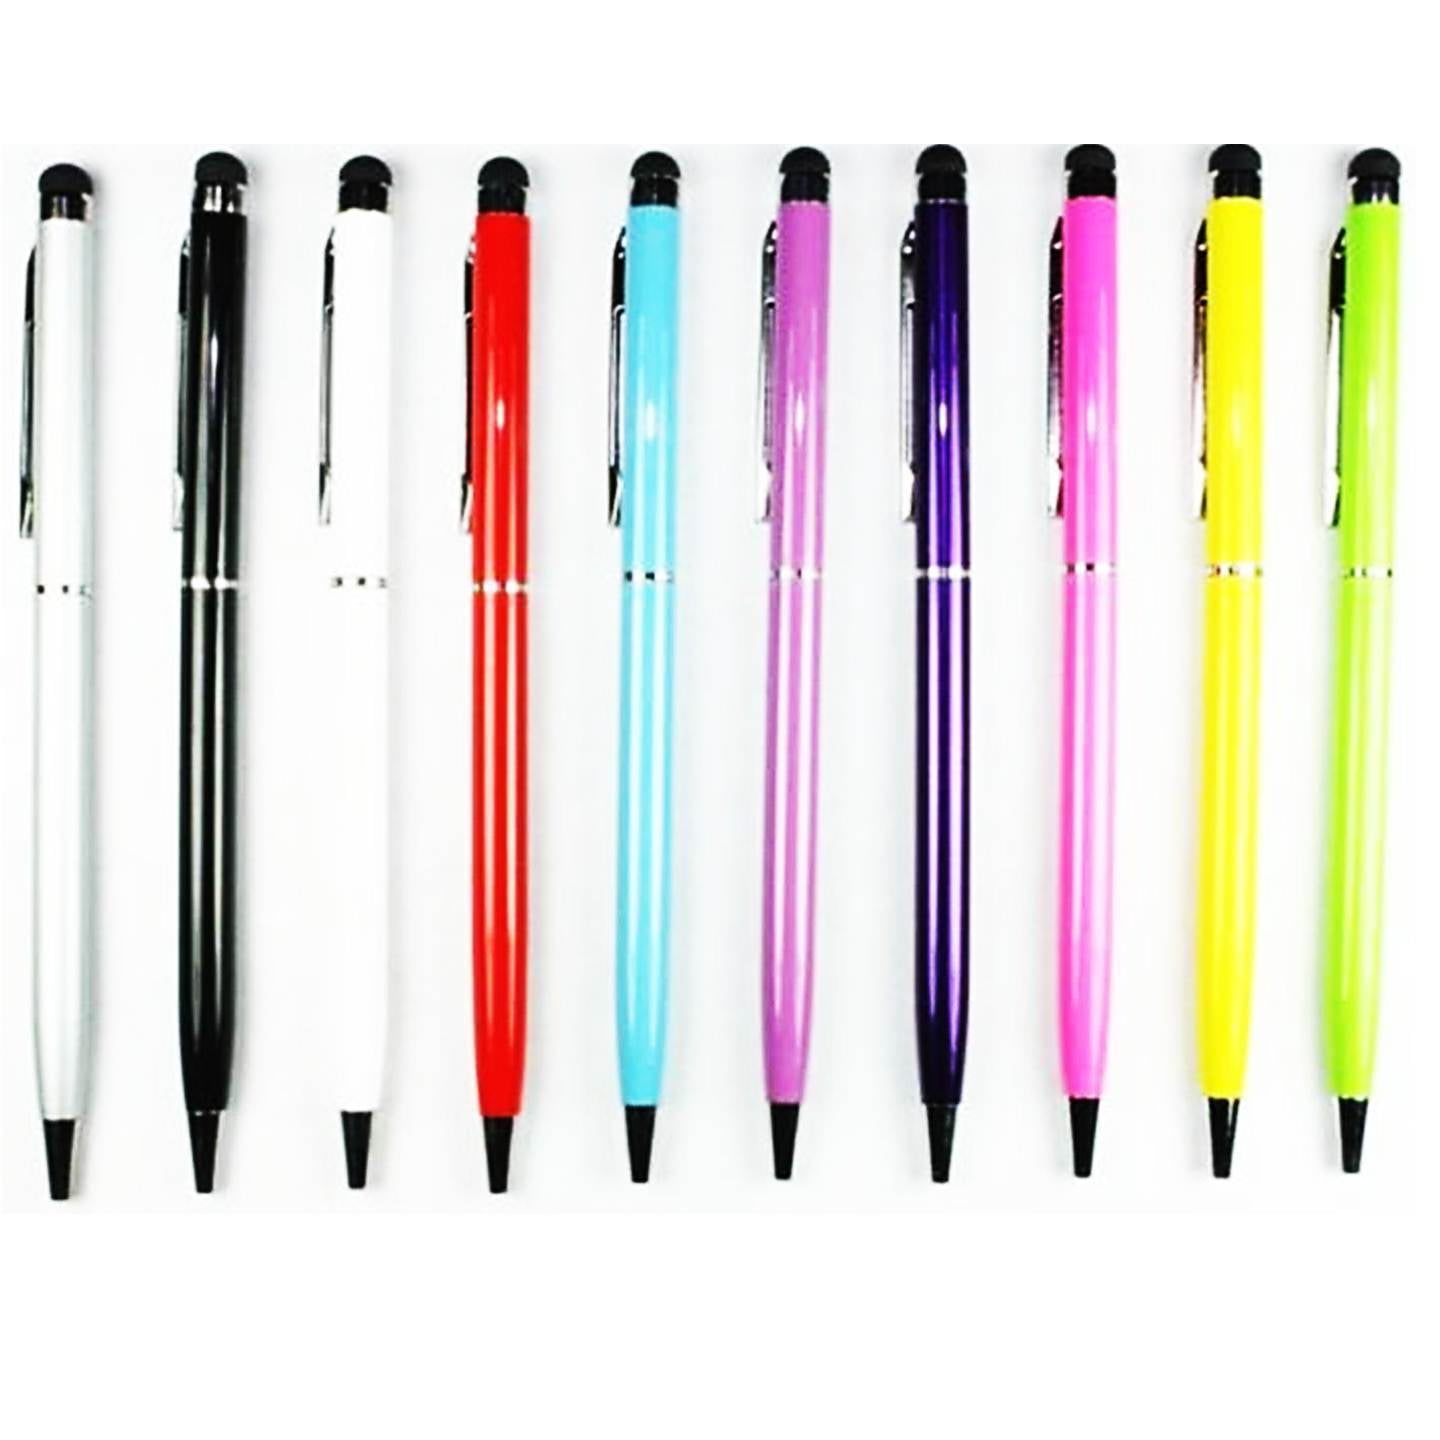 10pcs Crystal 2 in1 Stylus Touch Screen Pen for Tablet Phone Ball Point Pens 